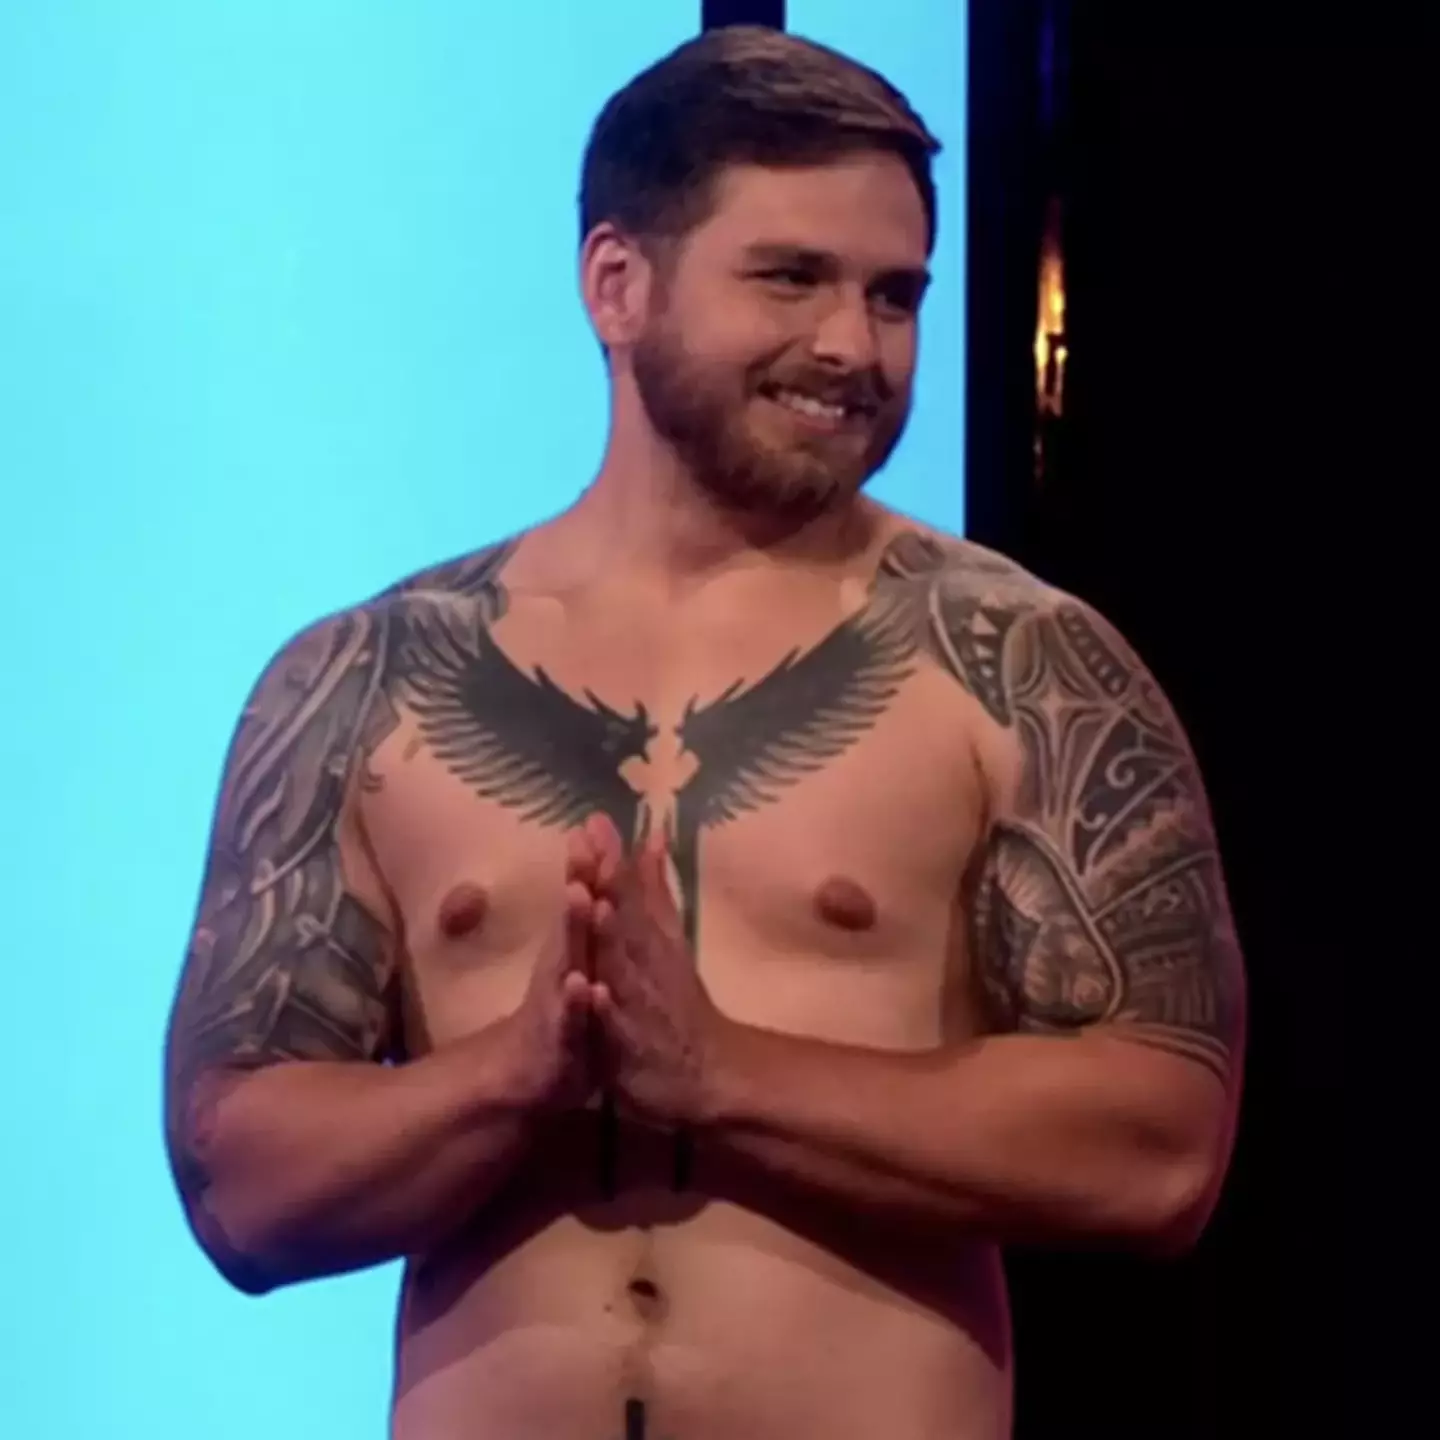 Conor explained why things didn't work out with who he chose on Naked Attraction.